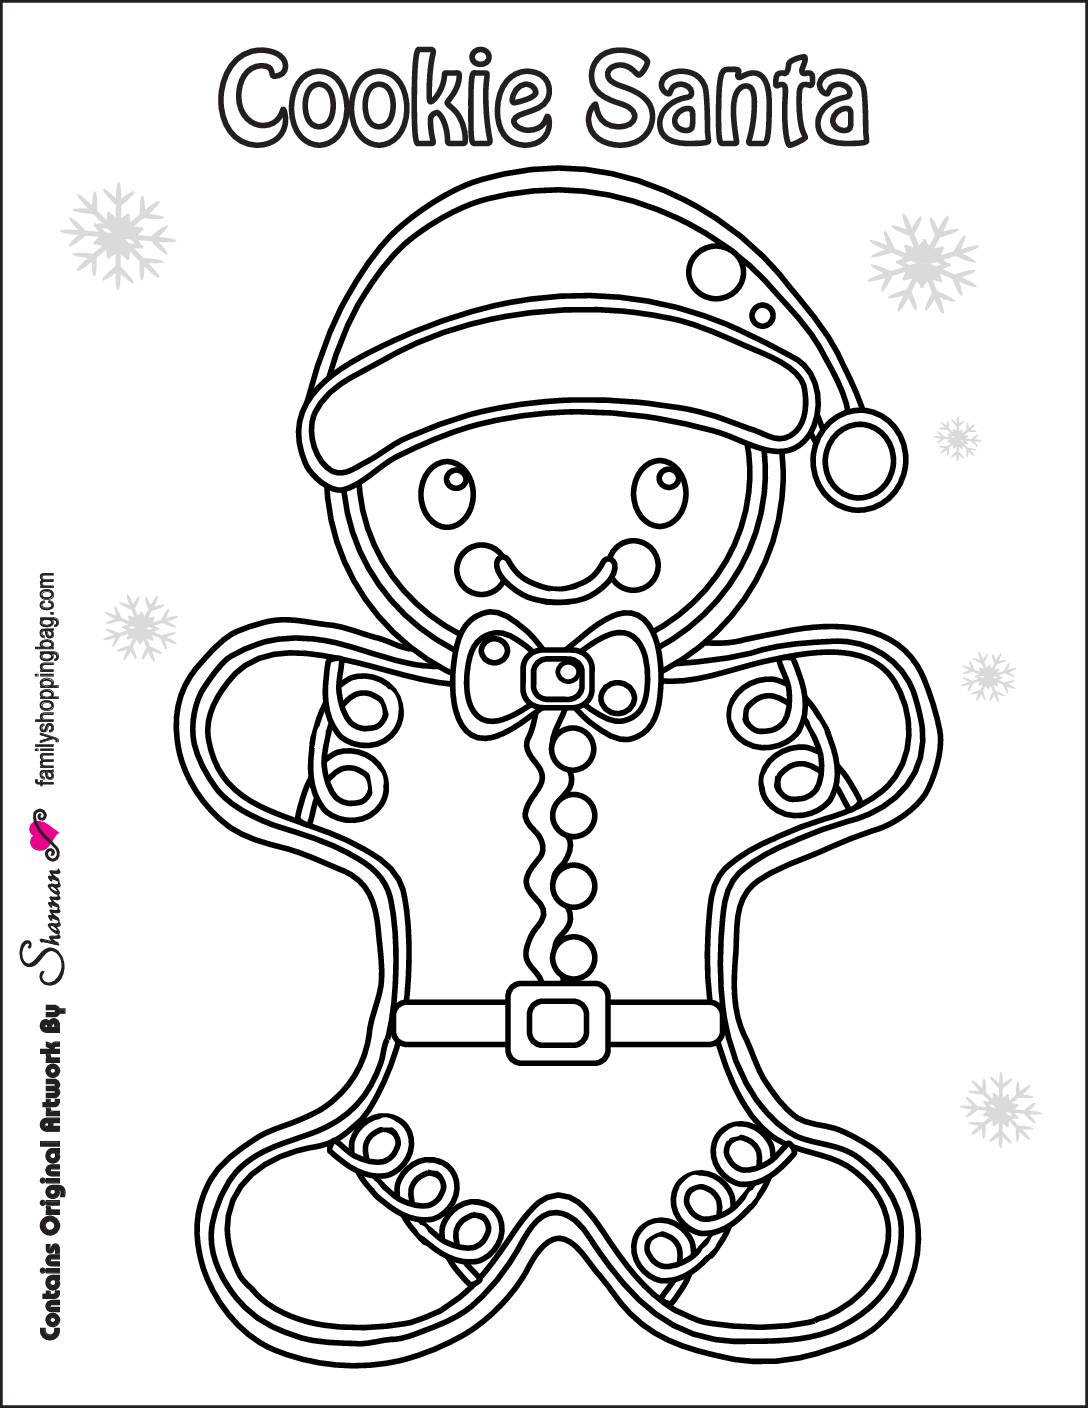 Free Printable Christmas Gingerbread Coloring Pages and More | Lil ...